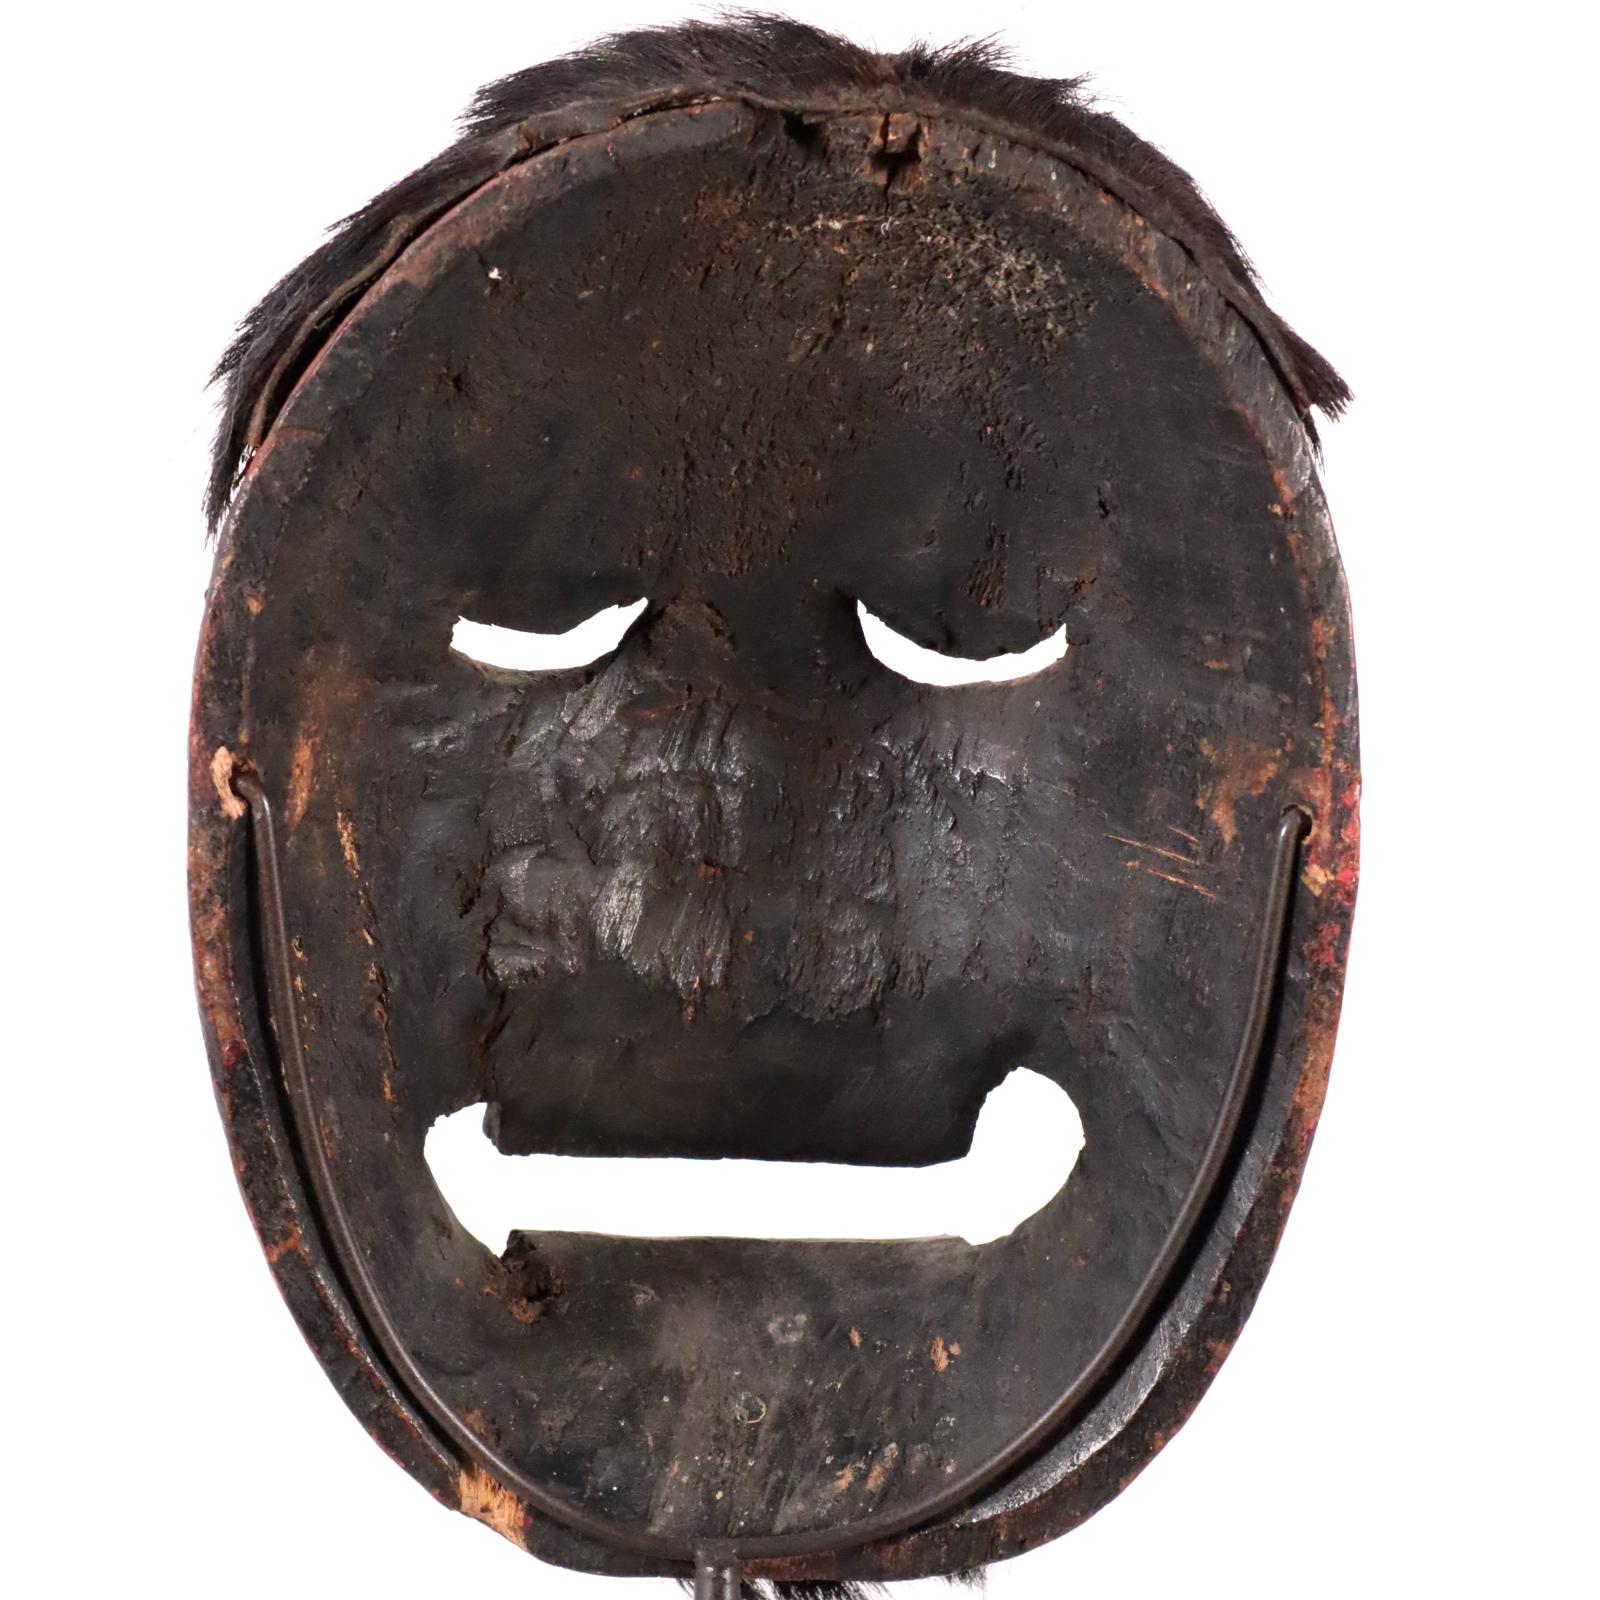 20th Century Wood and Hair Mask from Tribal Indonesia Probably Bali or Lombok Oceanic Art For Sale